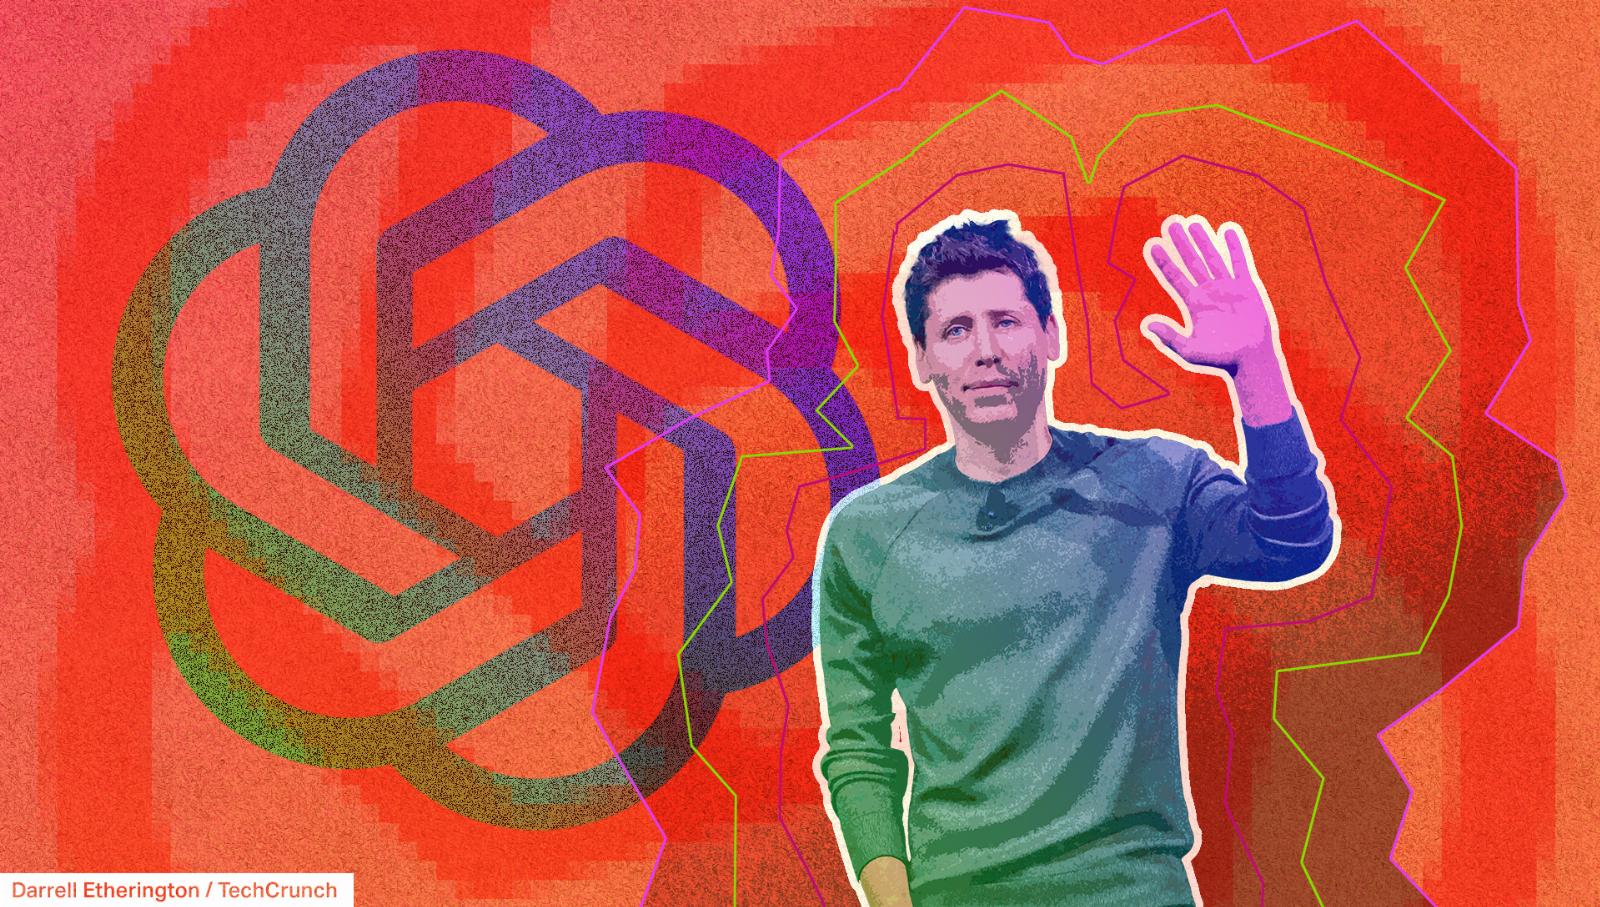 OpenAI, emerging from the ashes, has a lot to prove even with Sam Altman’s return